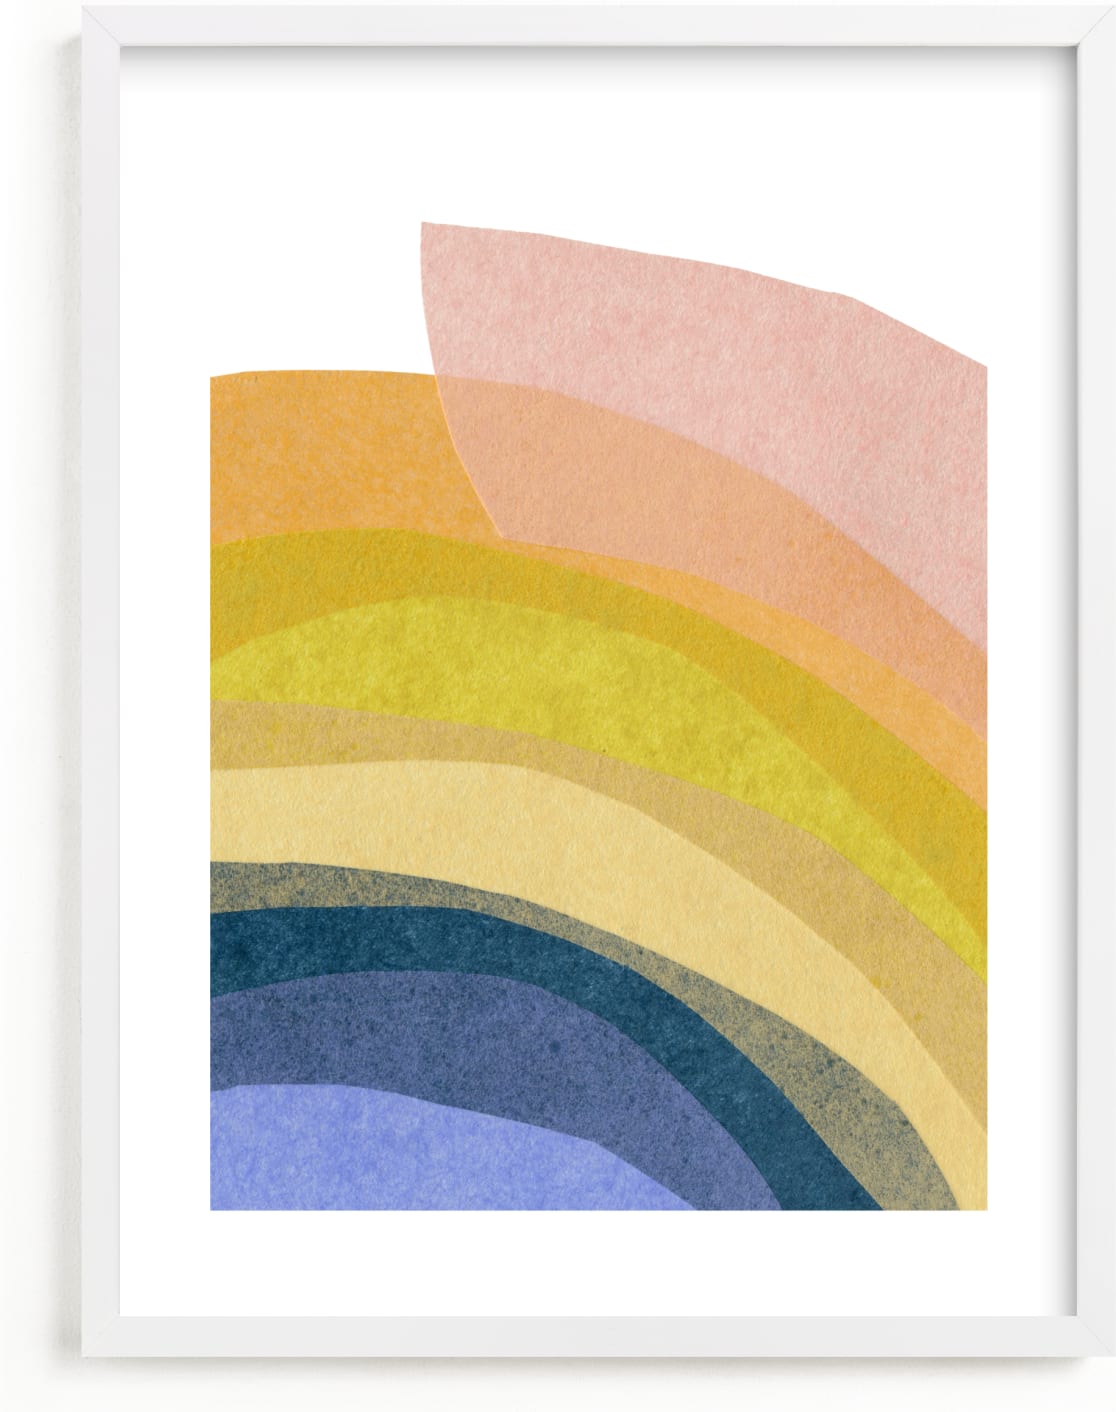 This is a colorful art by Carrie Moradi called paper rainbow.